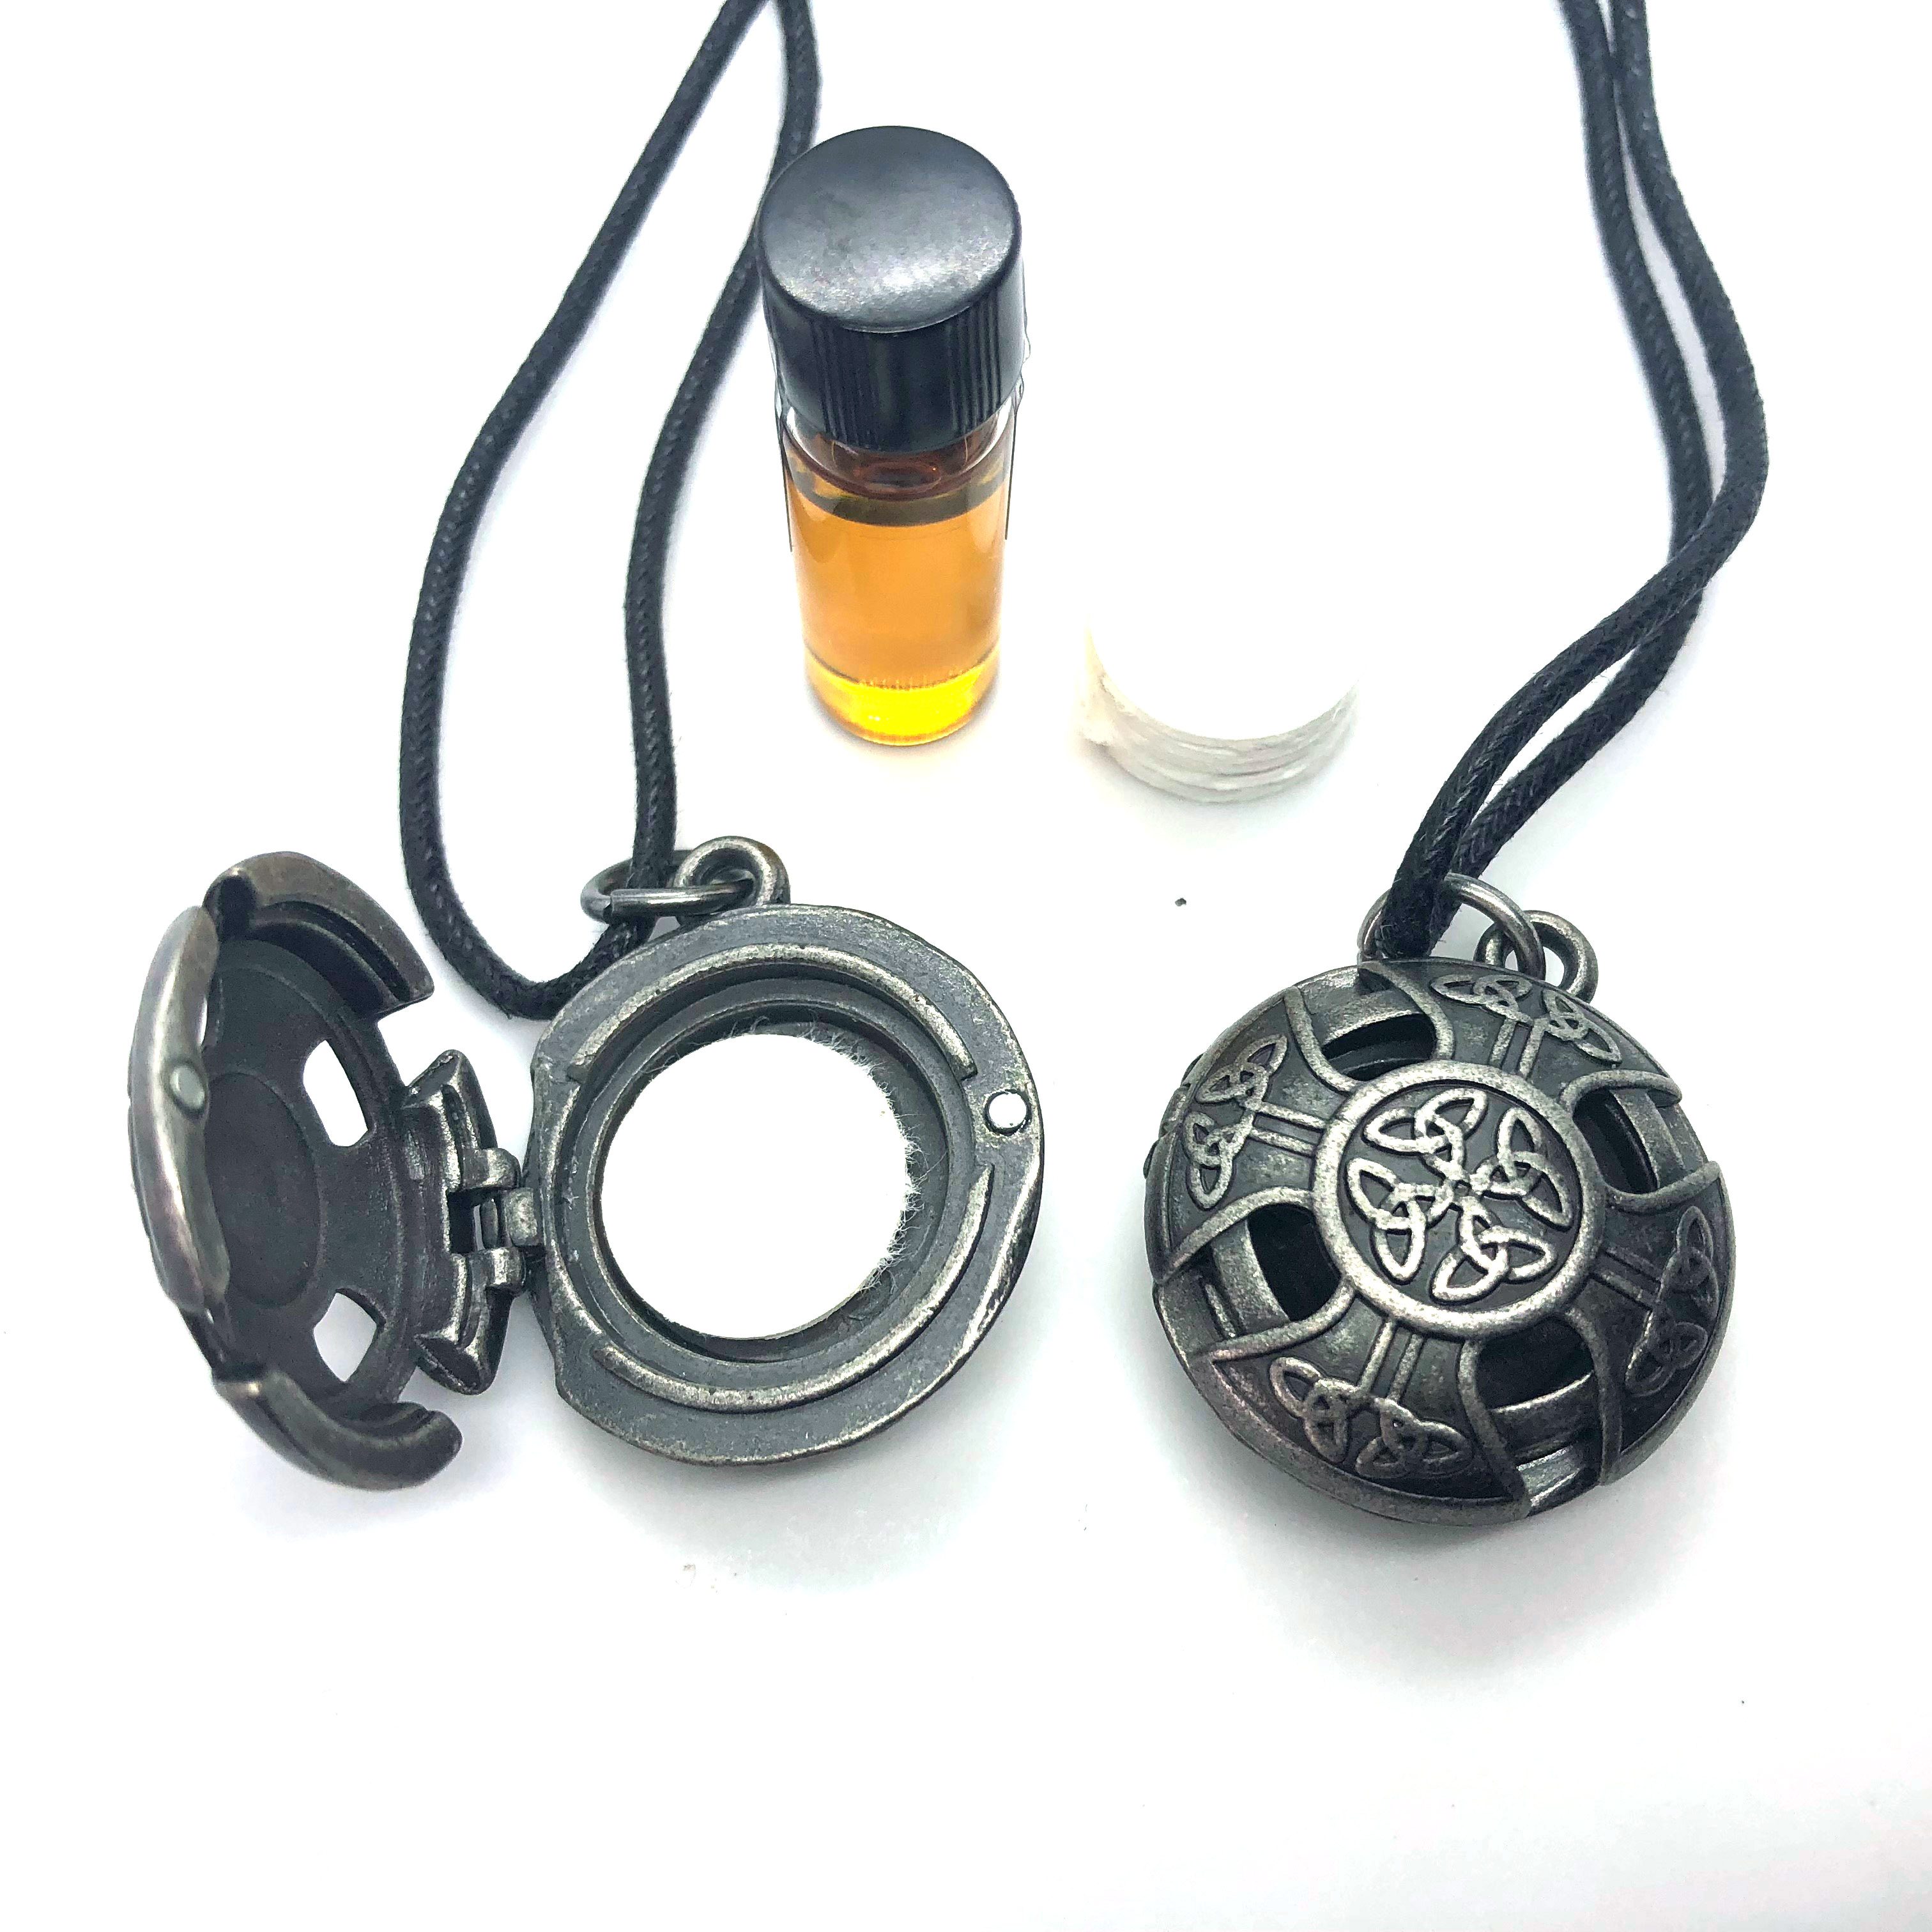 The Complete Guide to Essential Oil Diffuser Jewelry - Wellness Aromas